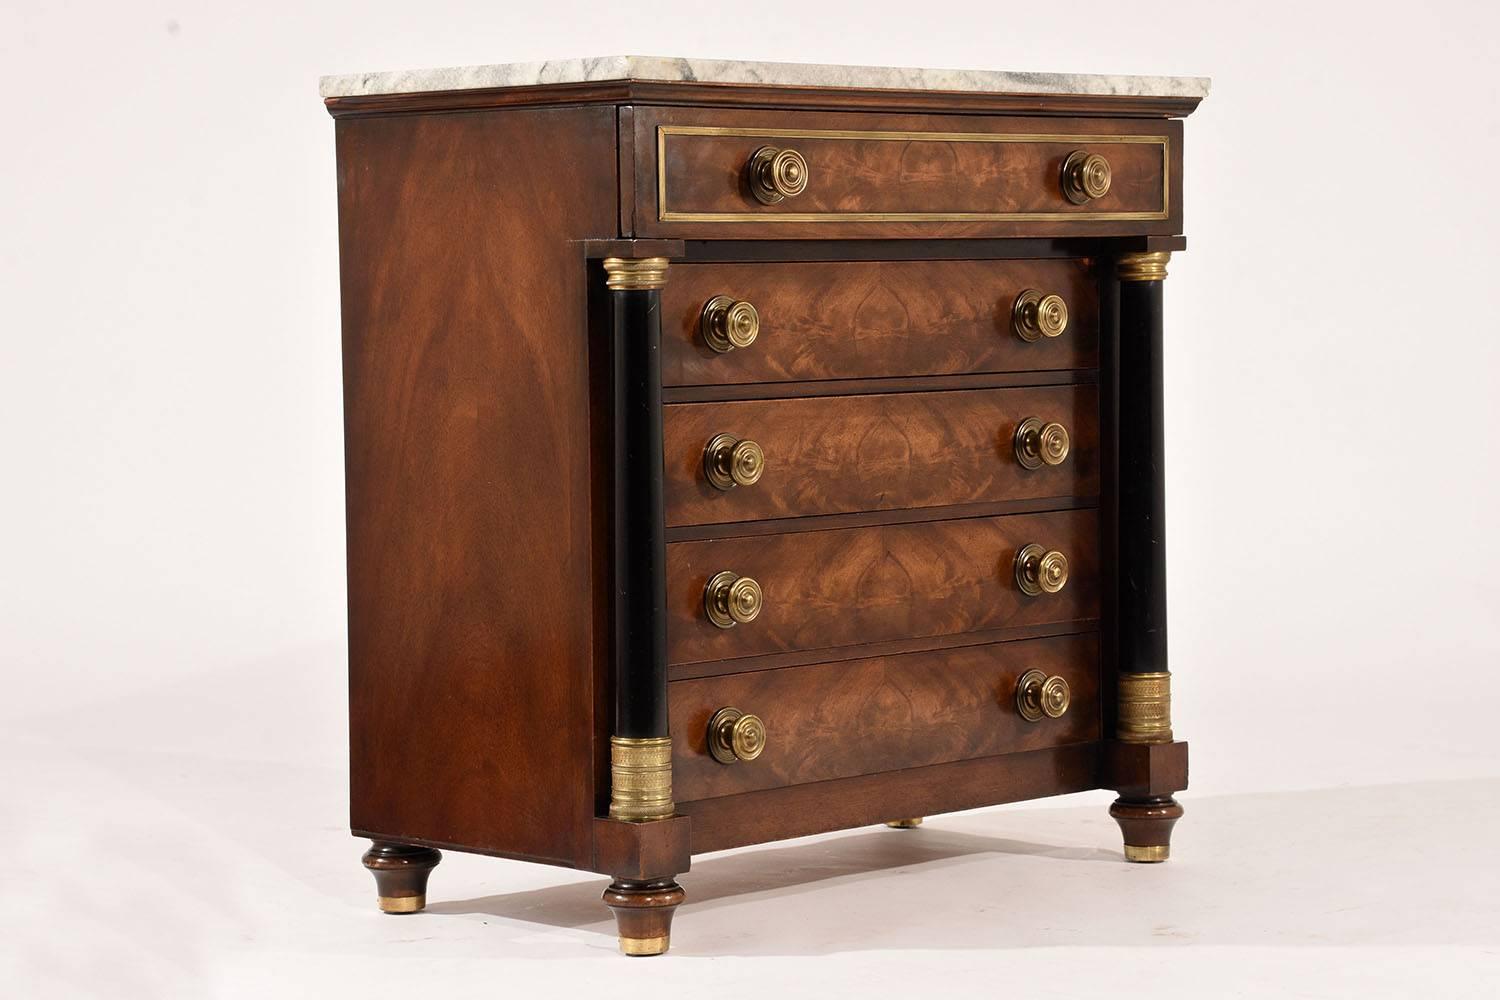 Carved Vintage Empire-Style Small Chest of Drawers